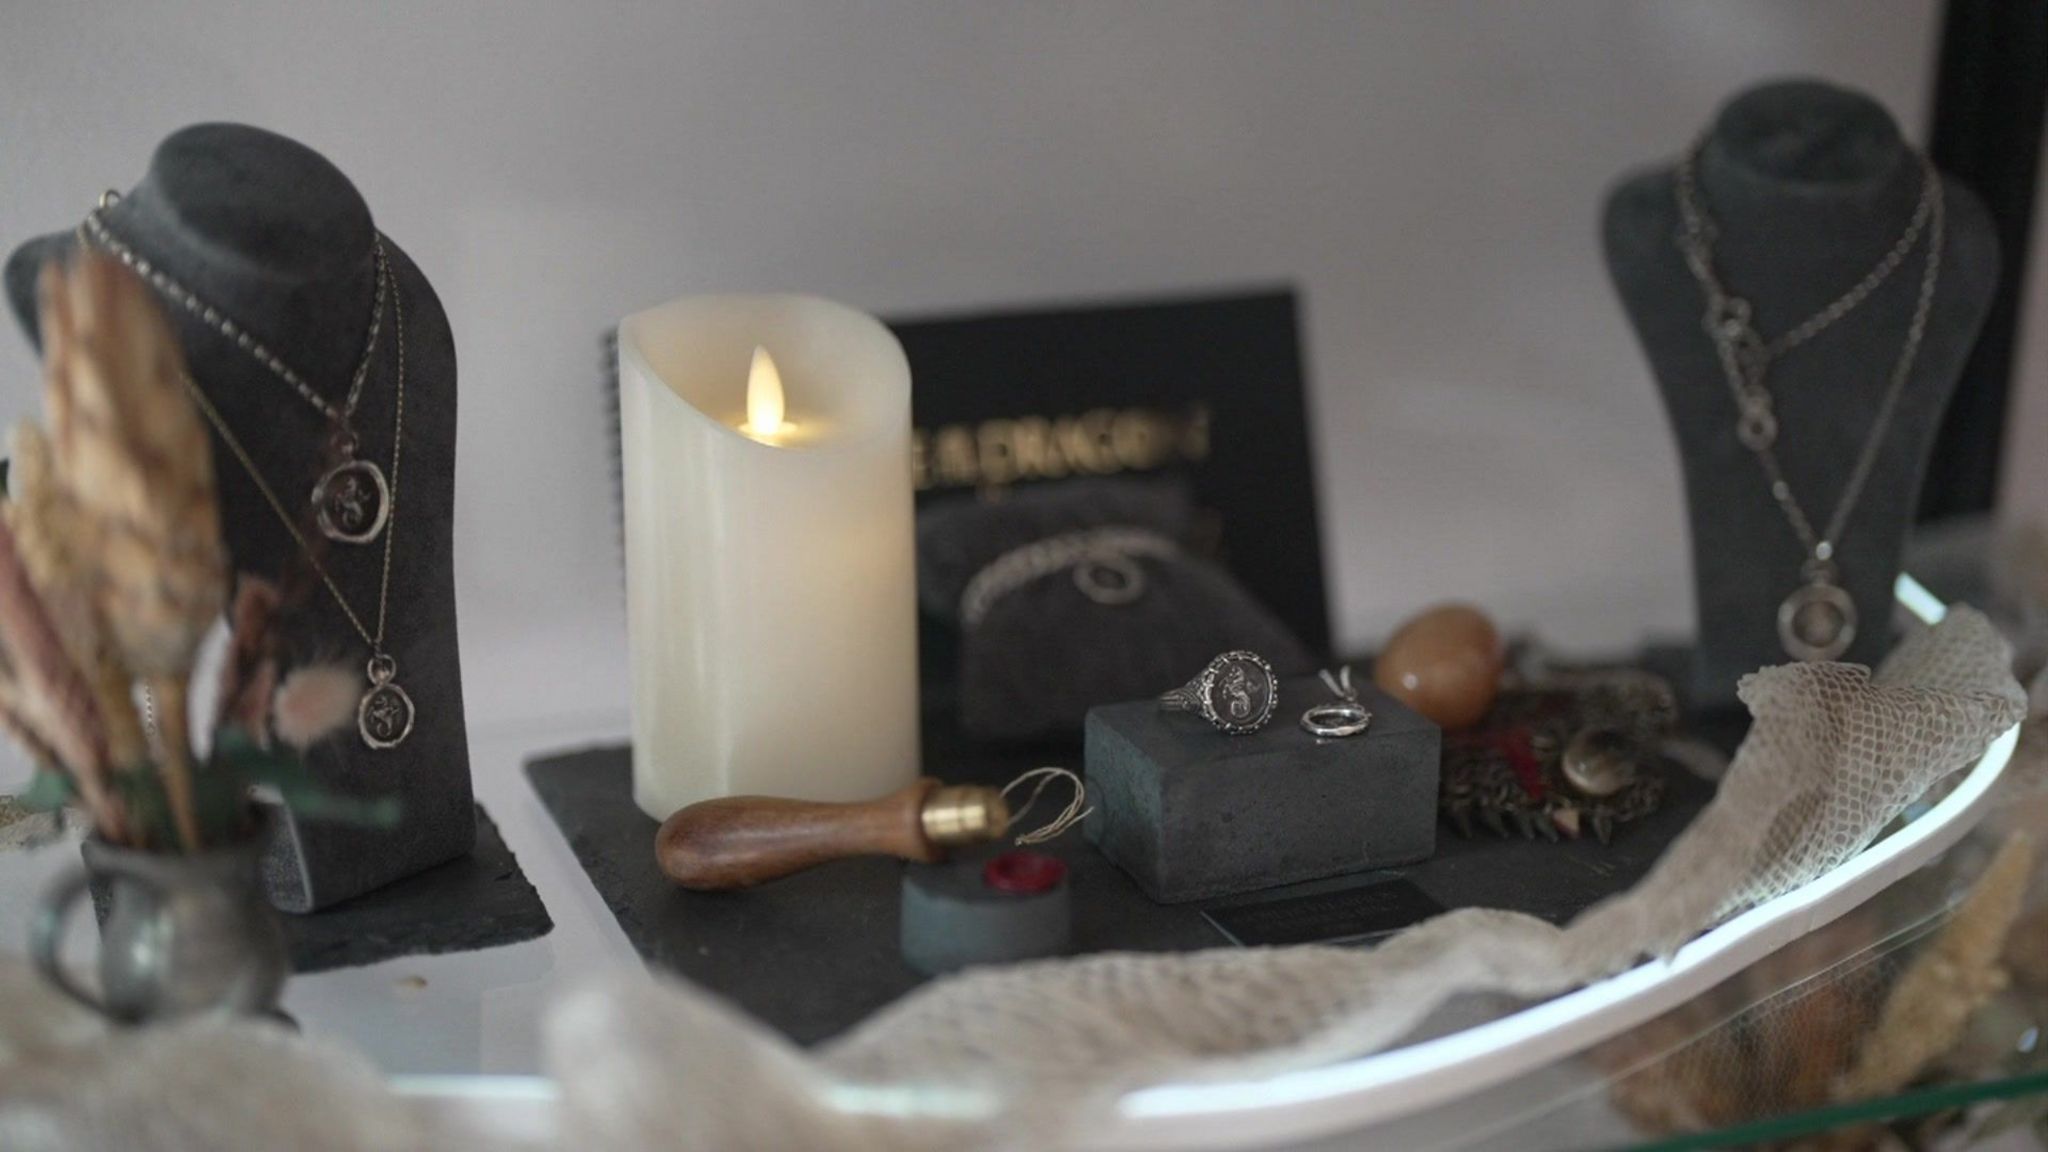 A bespoke House of the Dragon jewellery collection sits on a table which also has a lit white candle